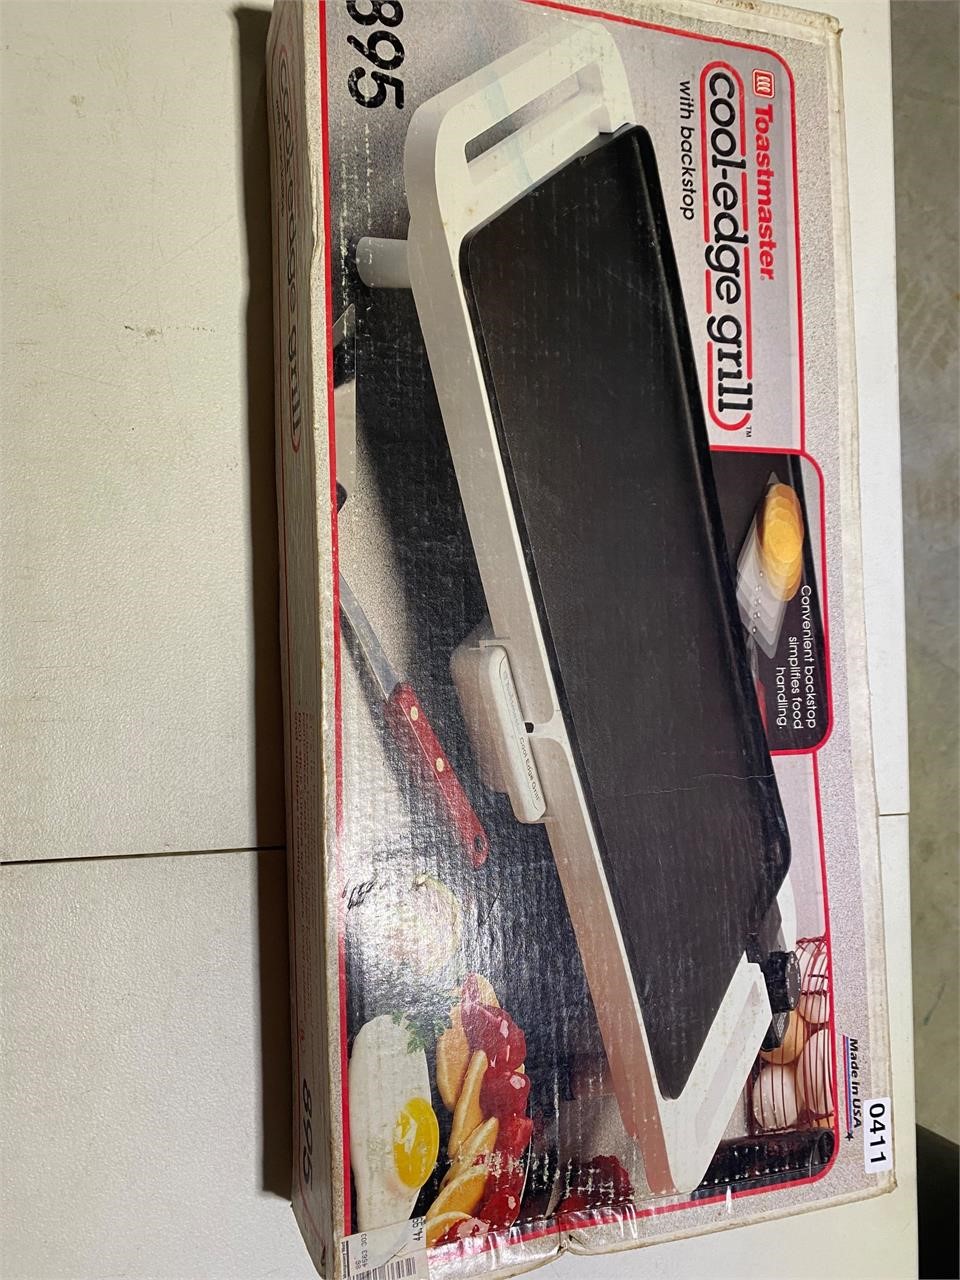 (New in box) Toastmaster Cool-edge Grill